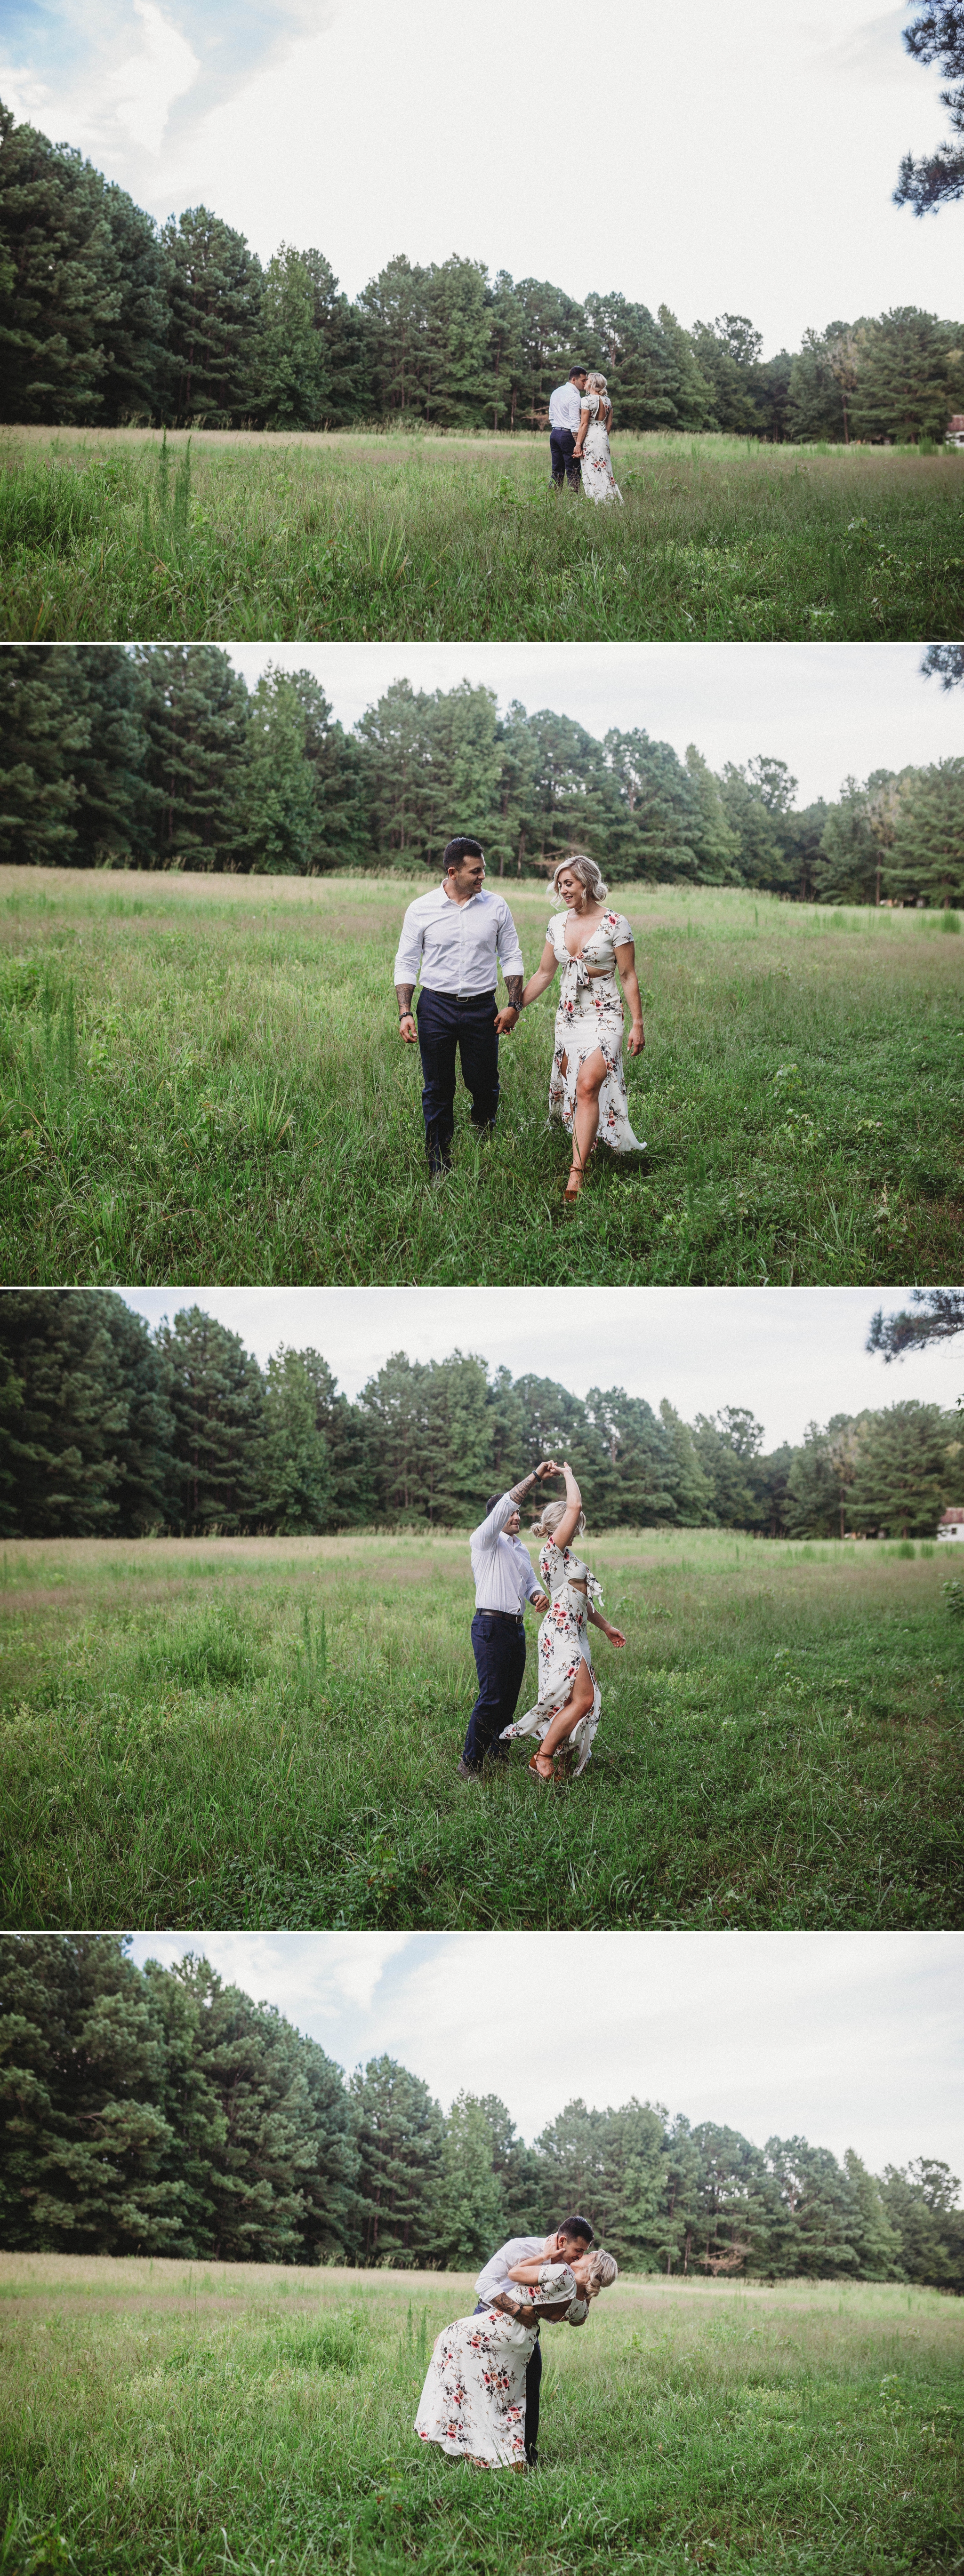 Cassie + Jesse - Engagement Photography Session in Fayetteville North Carolina - Raleigh Wedding Photographer